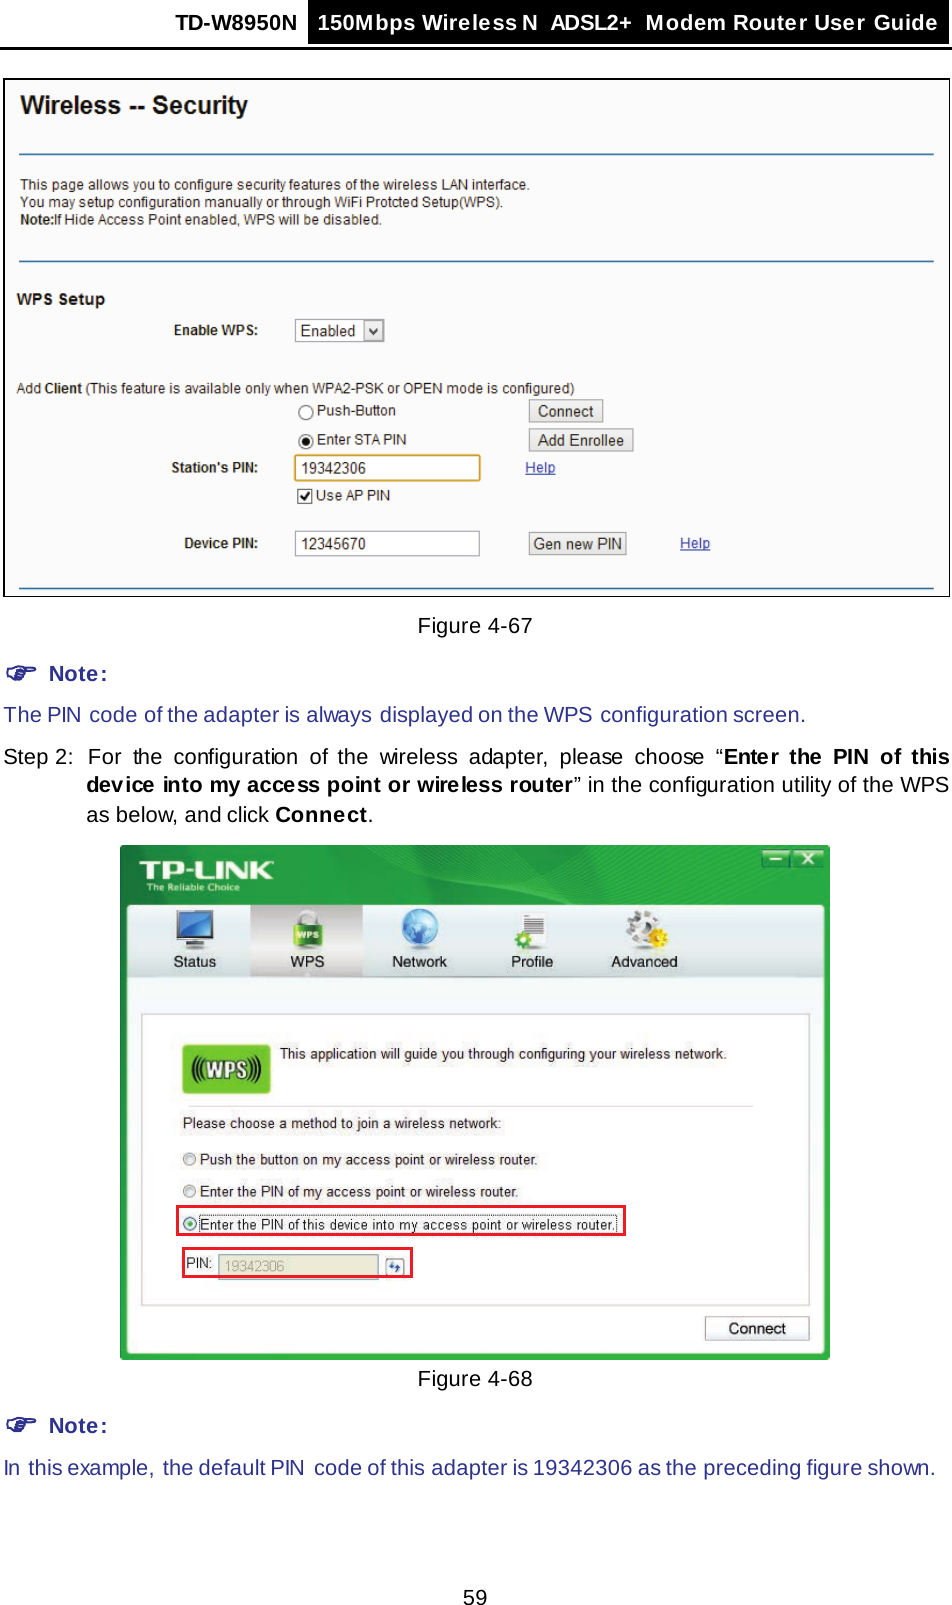 TD-W8950N 150Mbps Wireless N  ADSL2+ Modem Router User Guide  59  Figure 4-67  Note: The PIN  code of the adapter is always  displayed on the WPS configuration screen. Step 2: For the configuration of the wireless adapter, please  choose  “Enter the PIN of this device into my access point or wireless router” in the configuration utility of the WPS as below, and click Connect.   Figure 4-68  Note: In this example,  the default PIN  code of this adapter is 19342306 as the preceding figure shown. 